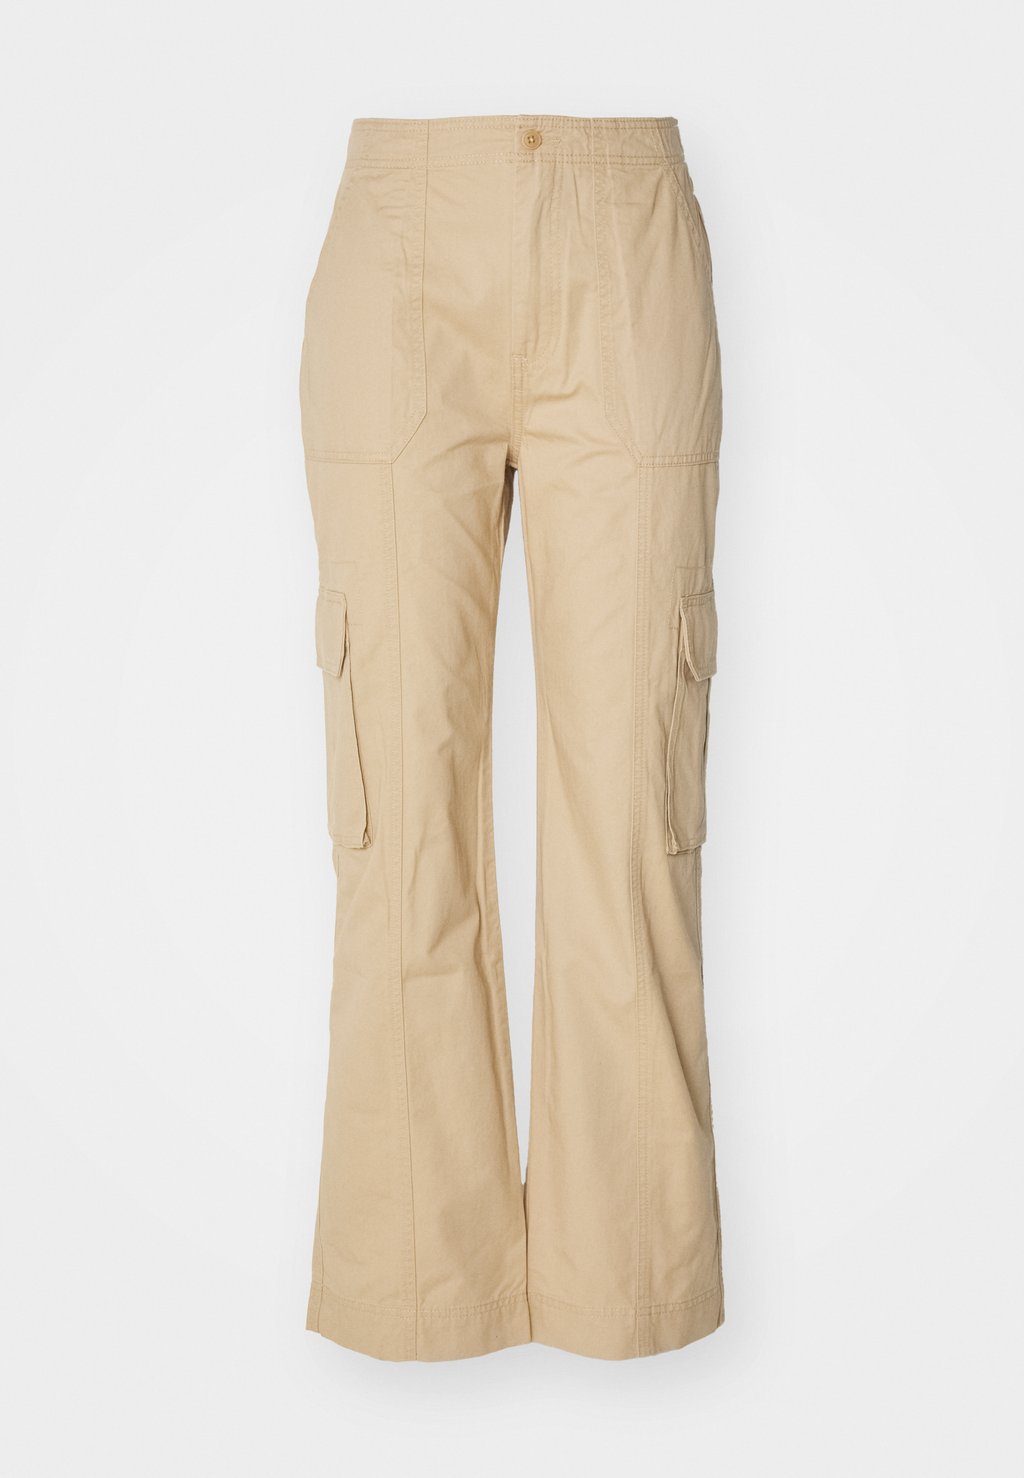 Брюки карго RELAXED CLEAN WAIST PANT Abercrombie & Fitch, хаки